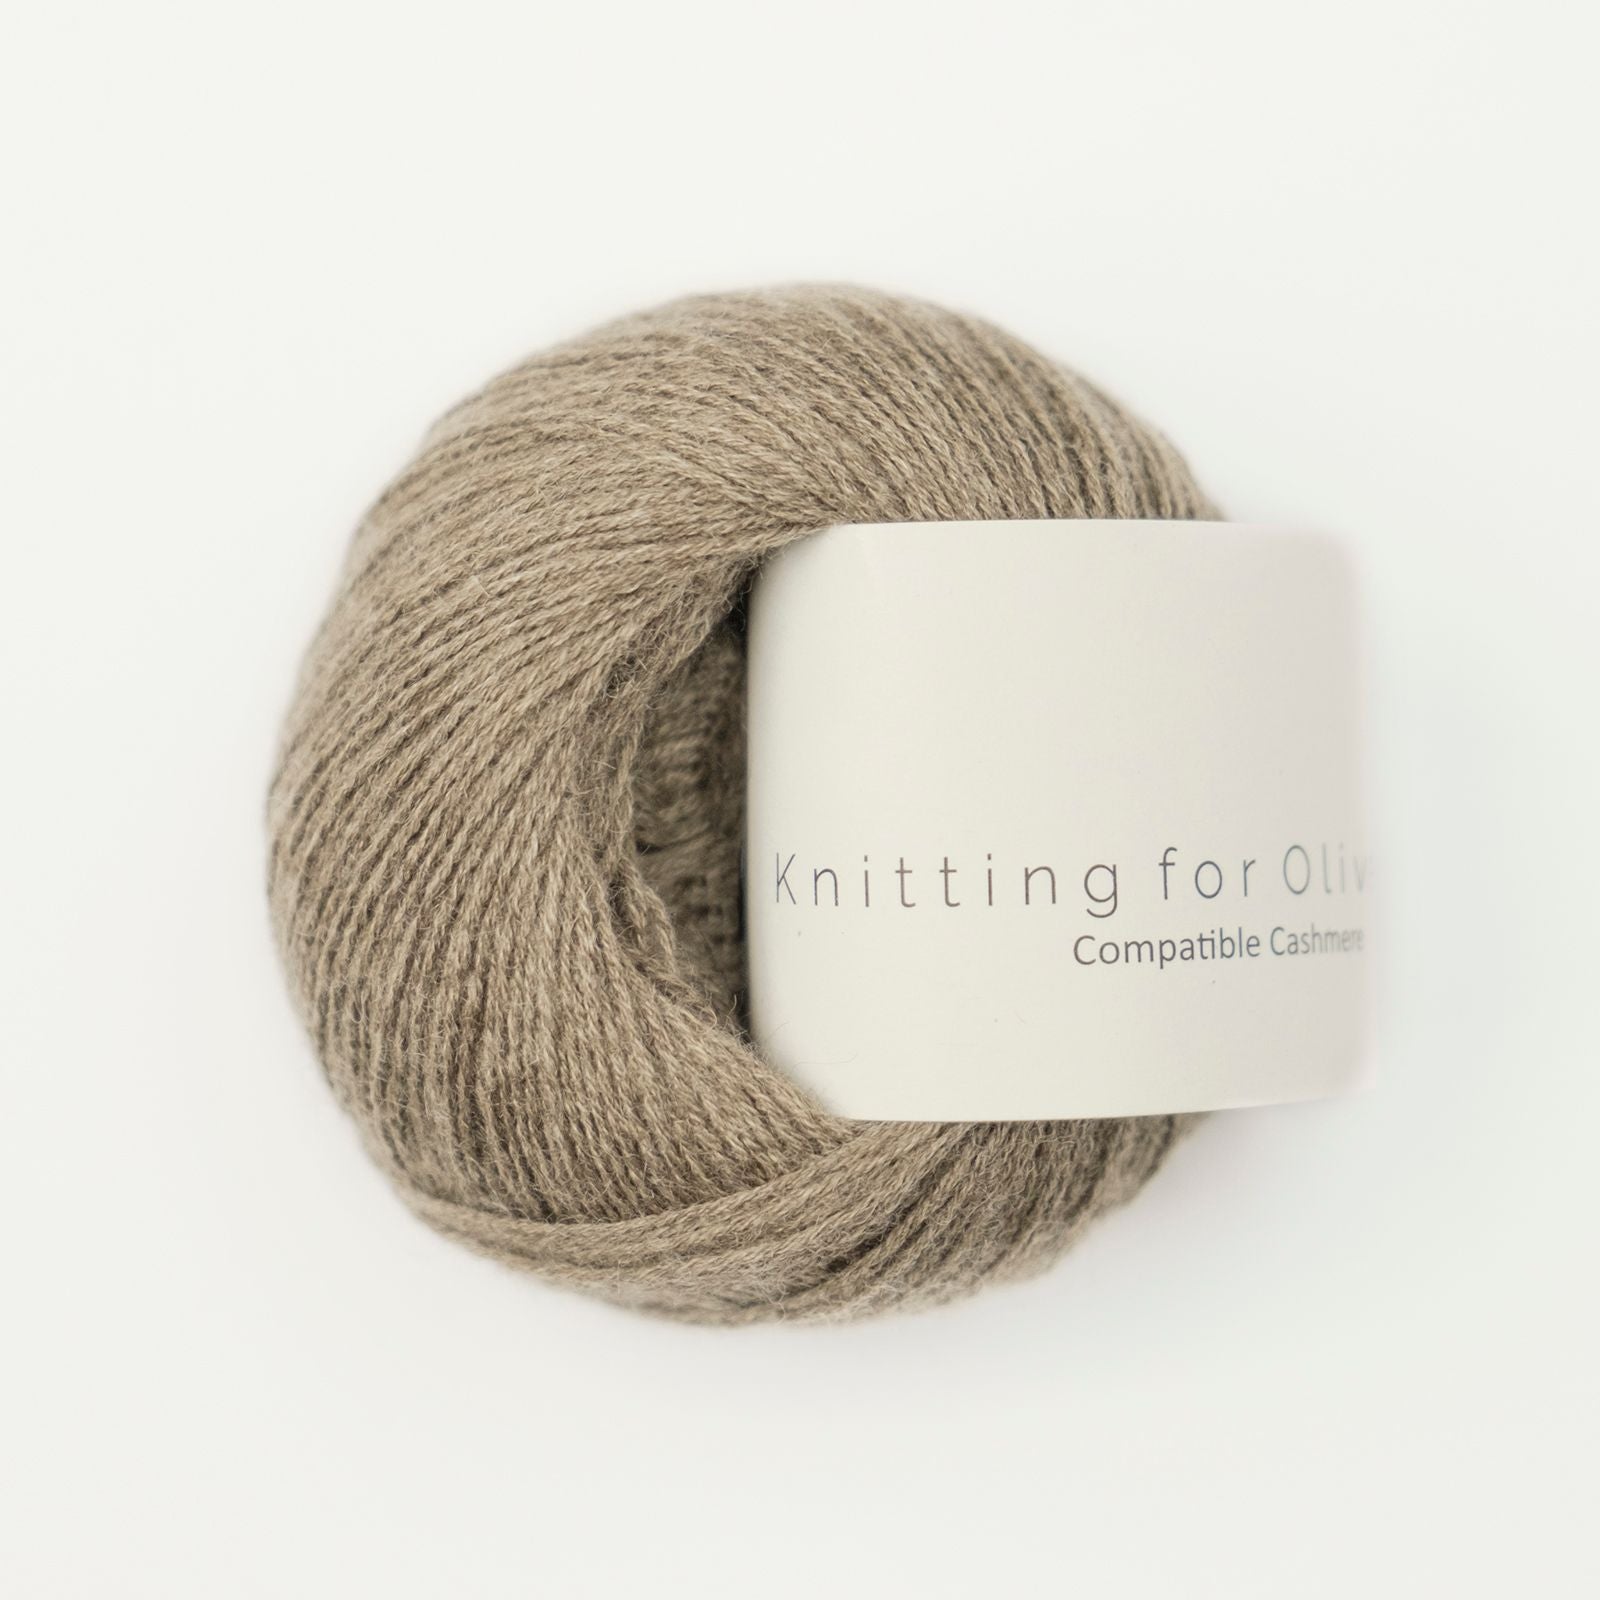 KNITTING FOR OLIVE COMPATIBLE CASHMERE – KNiTT